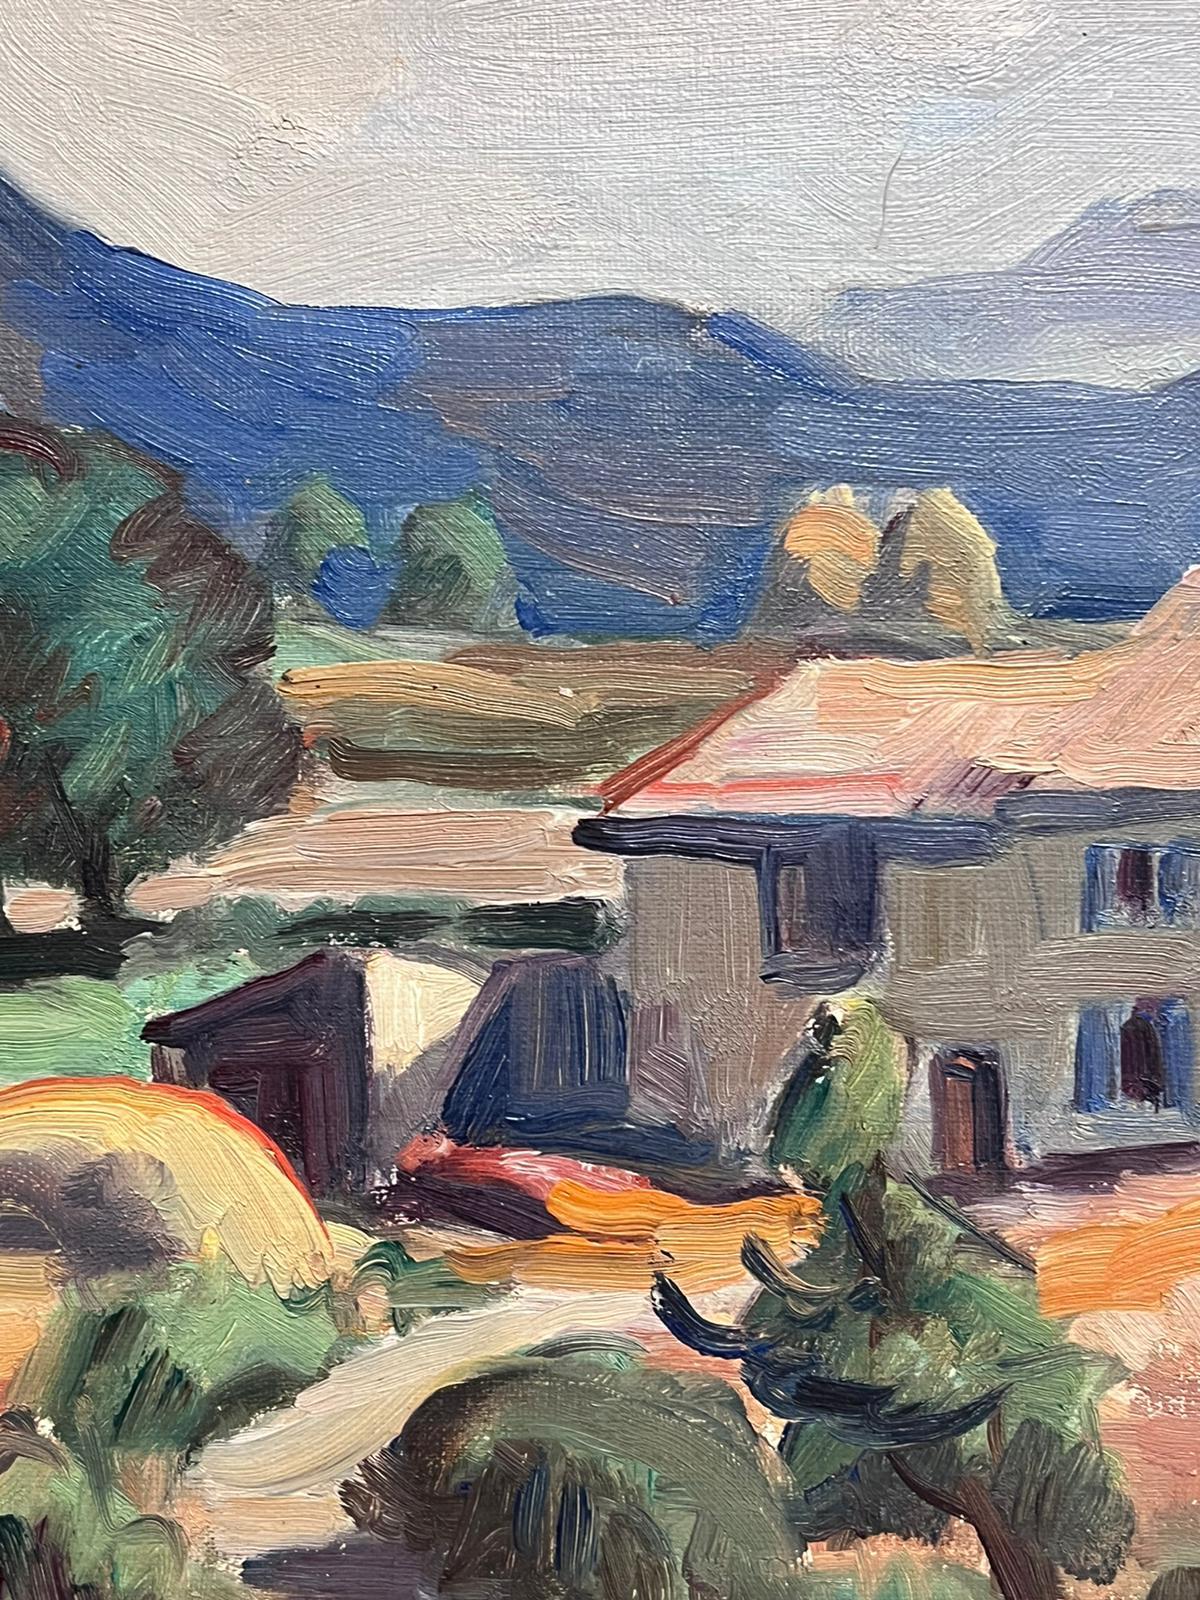 Les Alpilles, St. Remy-de-Provence
French School, mid 20th century
signed oil on board, framed
framed: 18 x 21 inches
board: 13 x 16 inches
provenance: private collection, Paris
condition: very good and sound condition 

We believe that the view